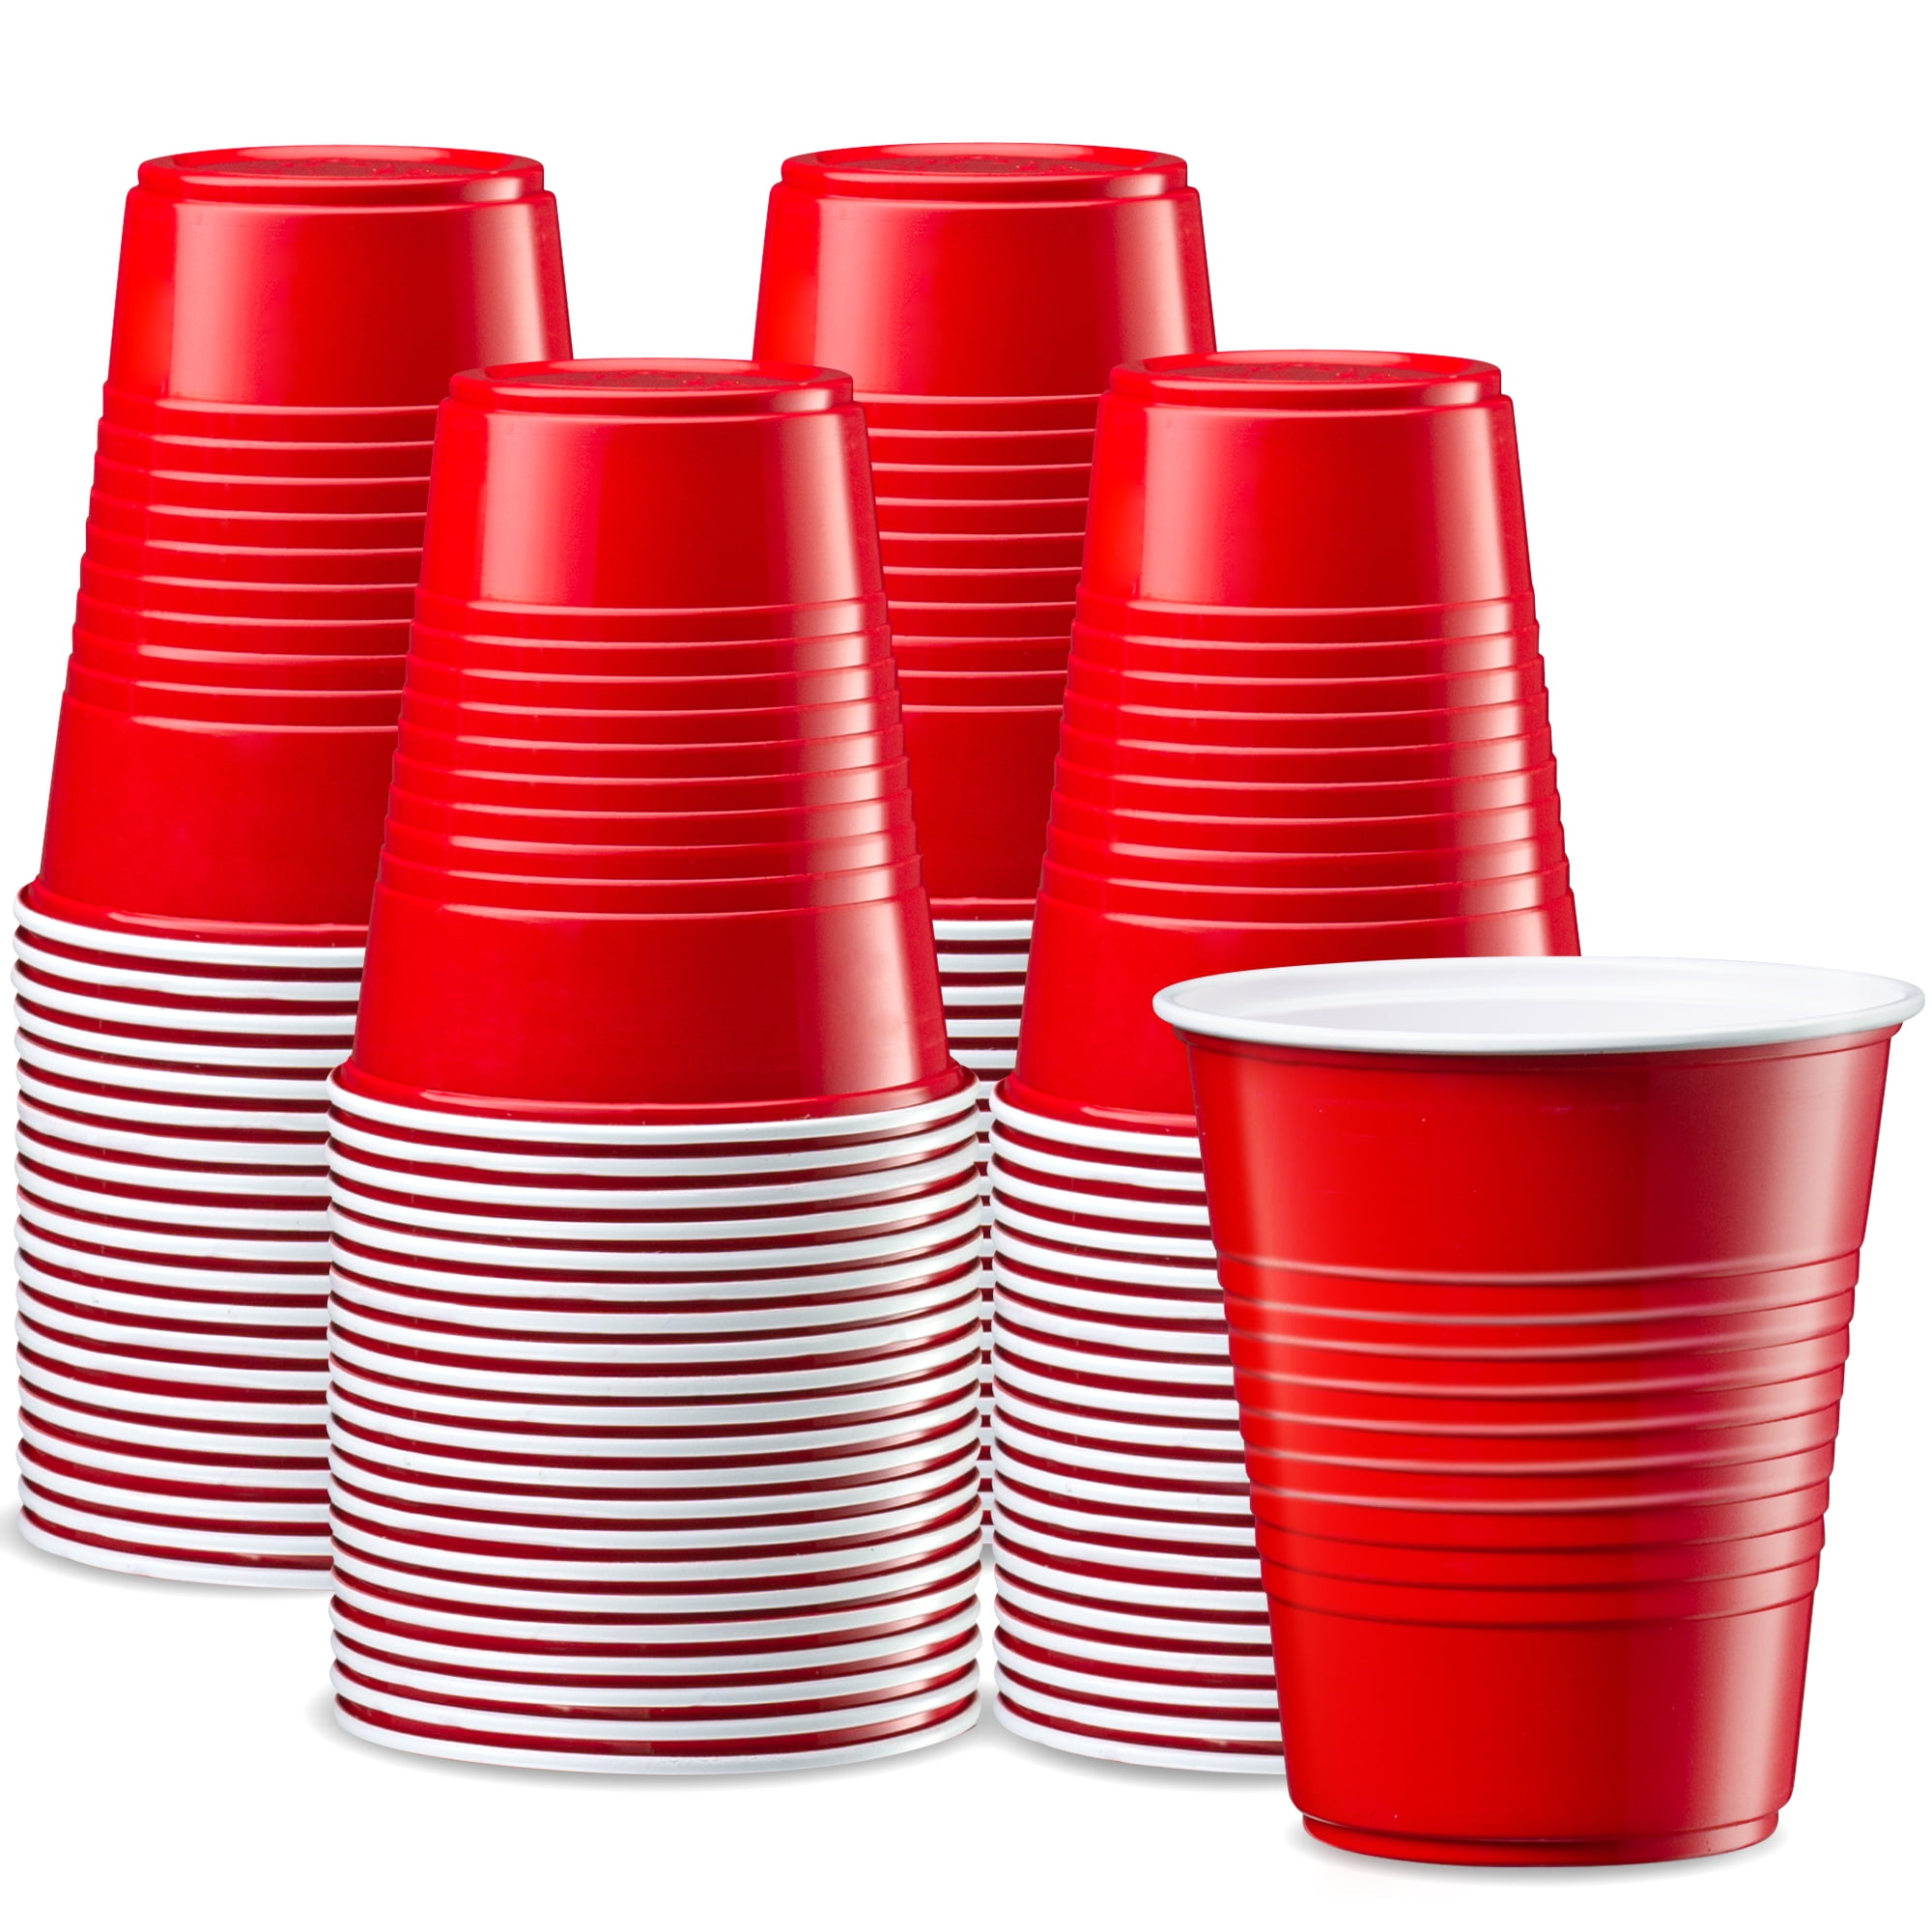 Size 1 oz Blue Plastic Shot Cups Great for Weddings Picnics or Party Favors 48 Pack Parties